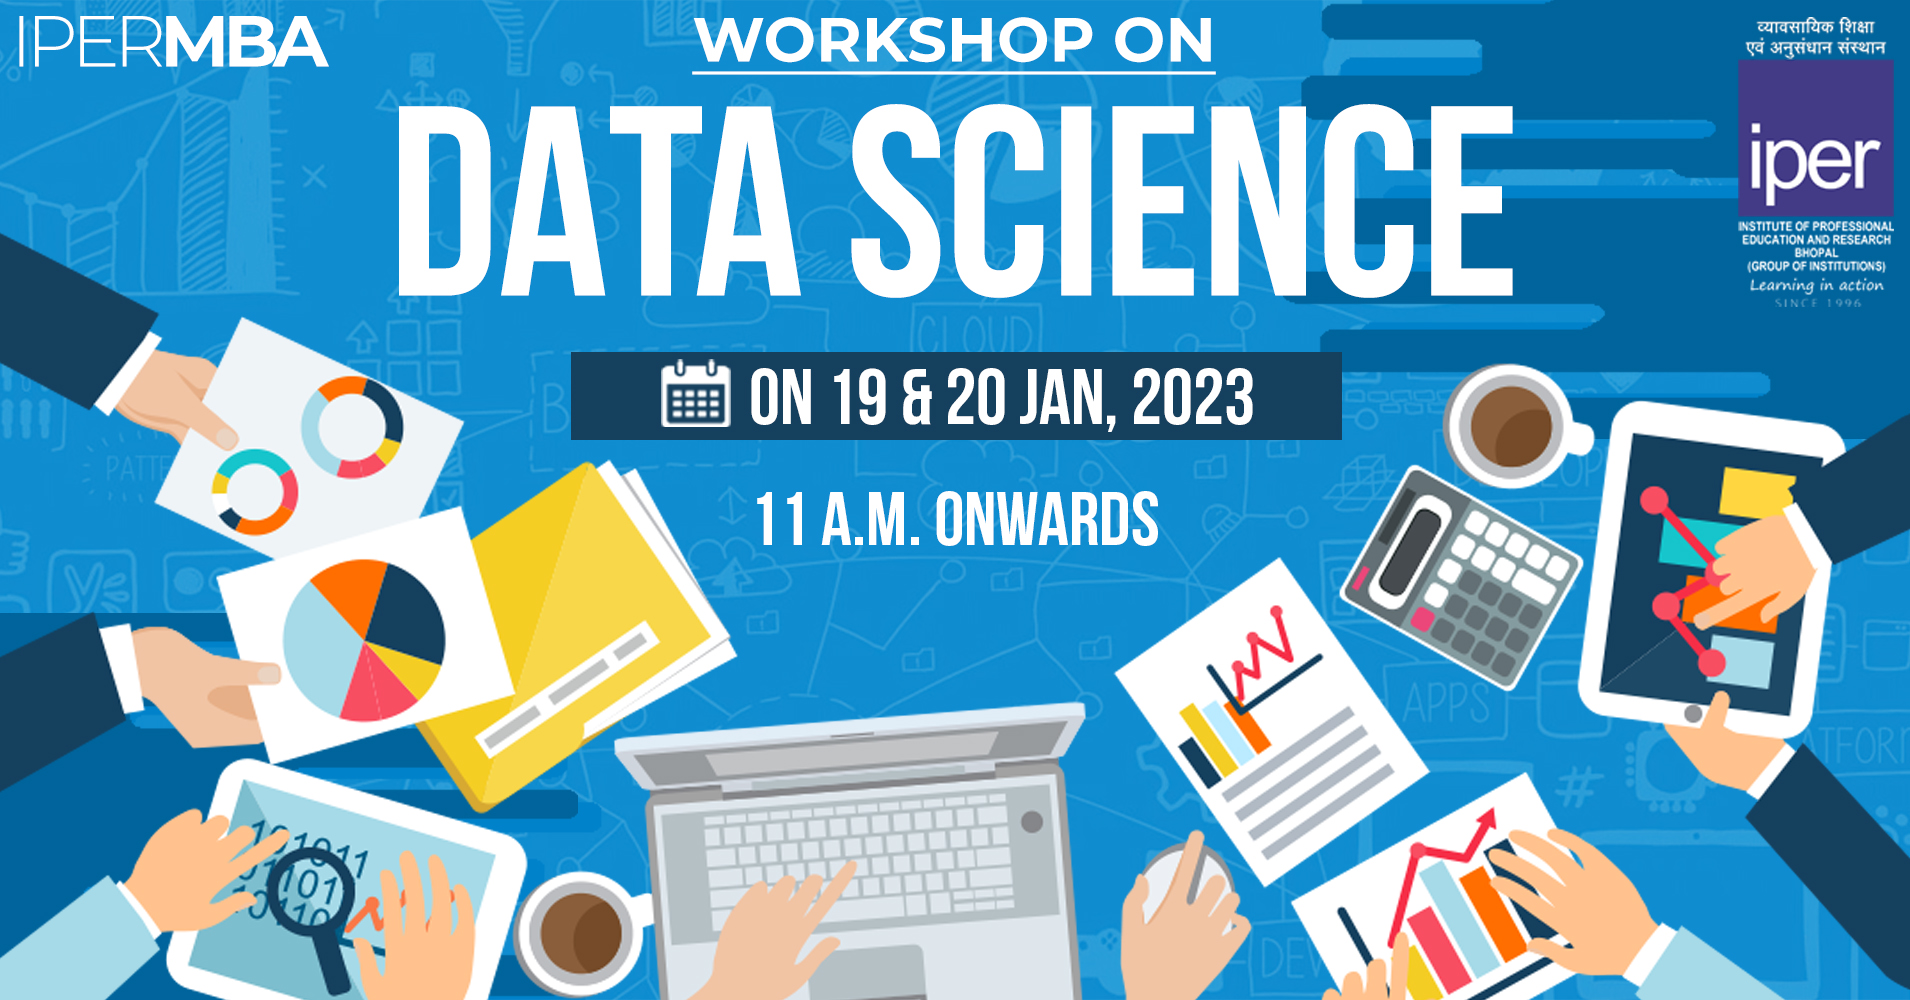 Data Science Workshop at IPER MBA on 19th Jan, 2023